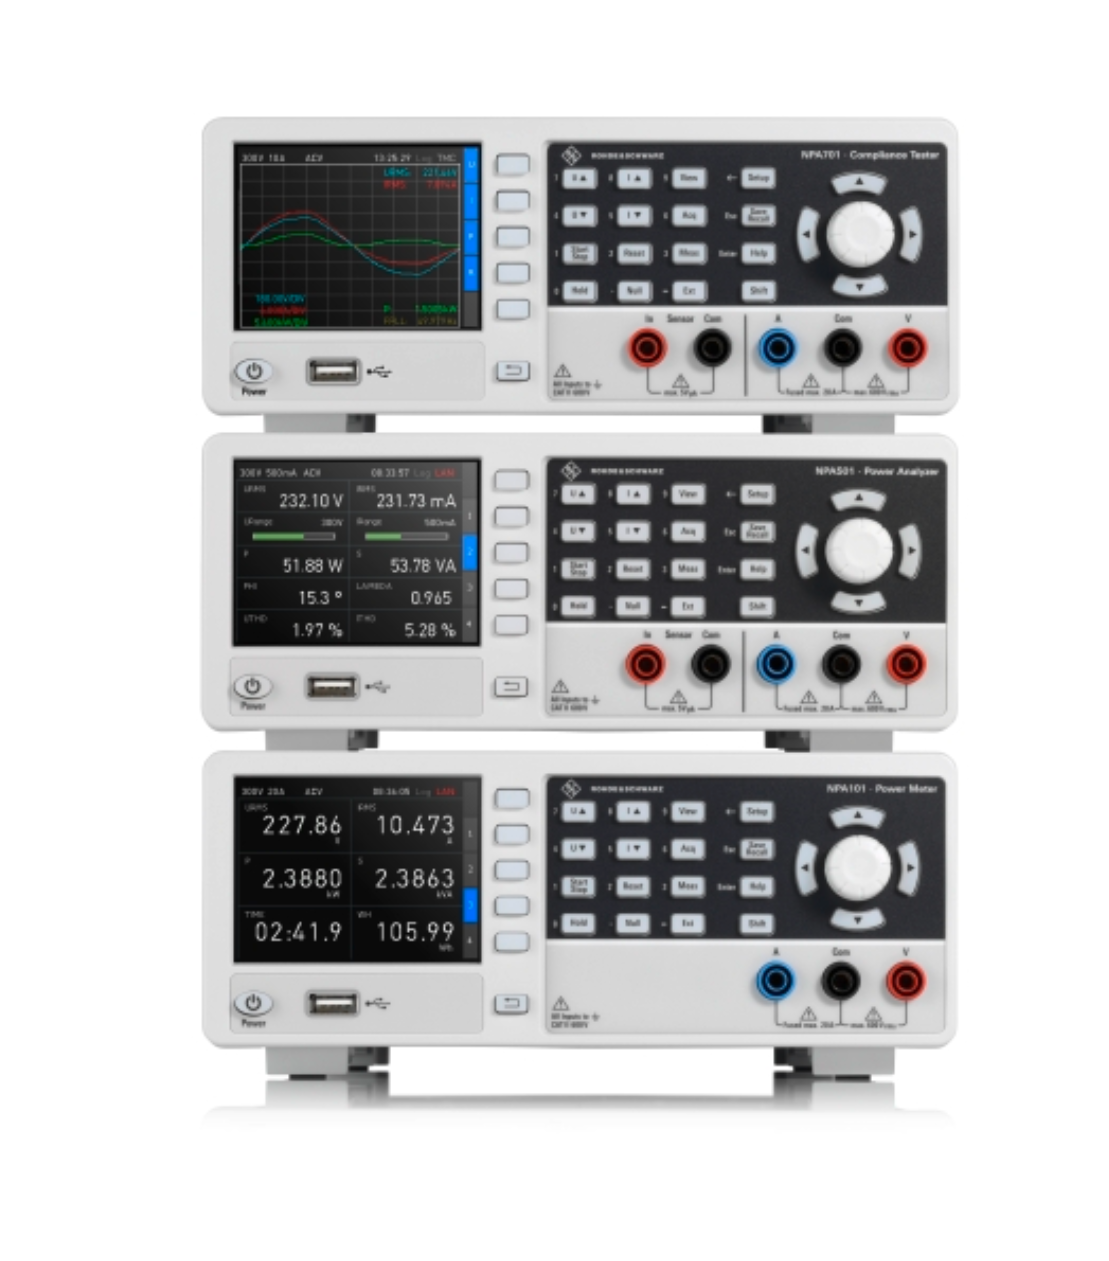  Rhodes and Schwartz launched a new R&S NPA series compact power analyzer to meet all power measurement requirements